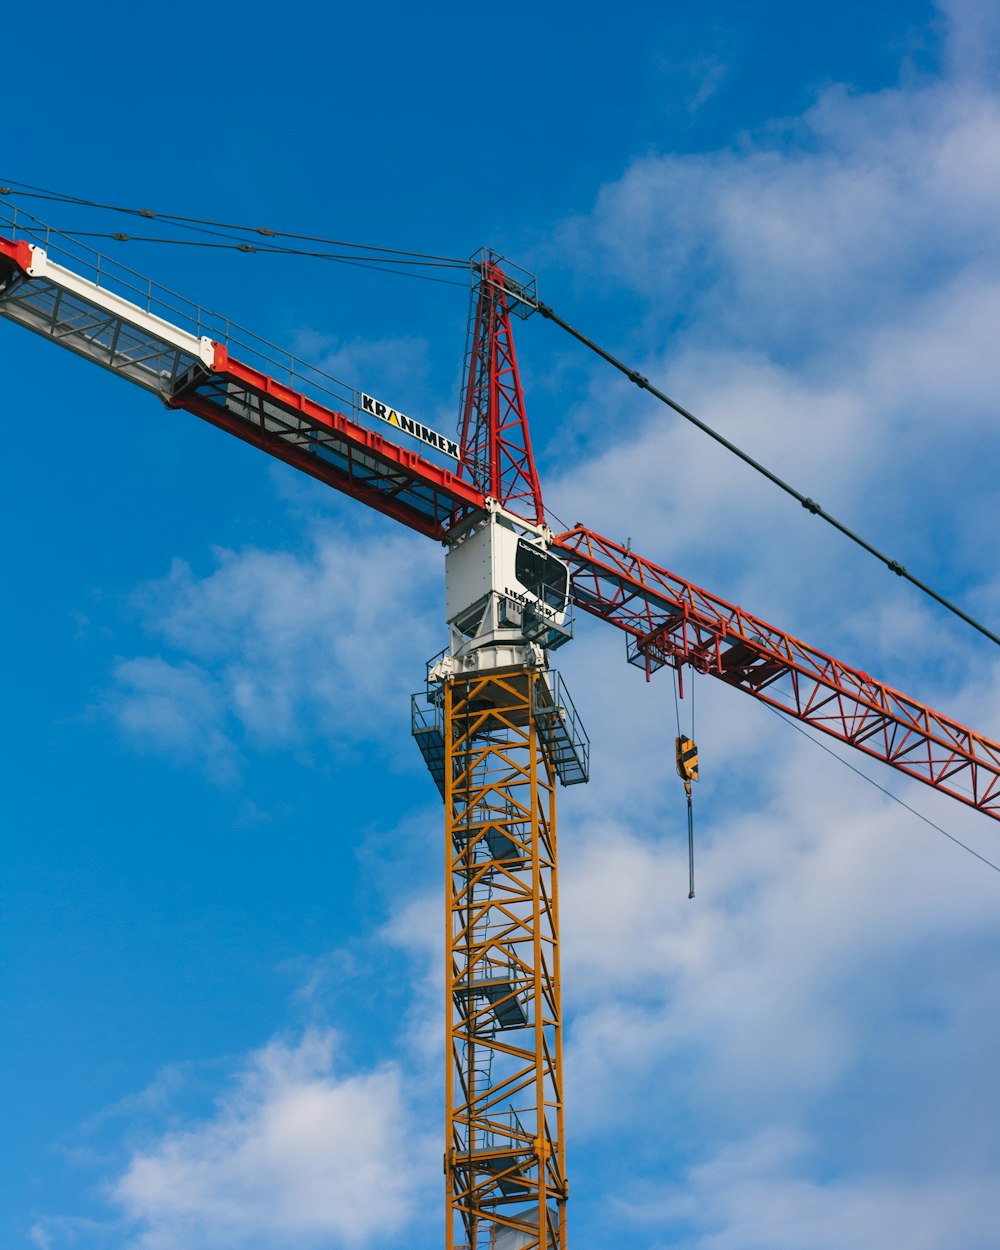 a red and white tower crane against a blue sky